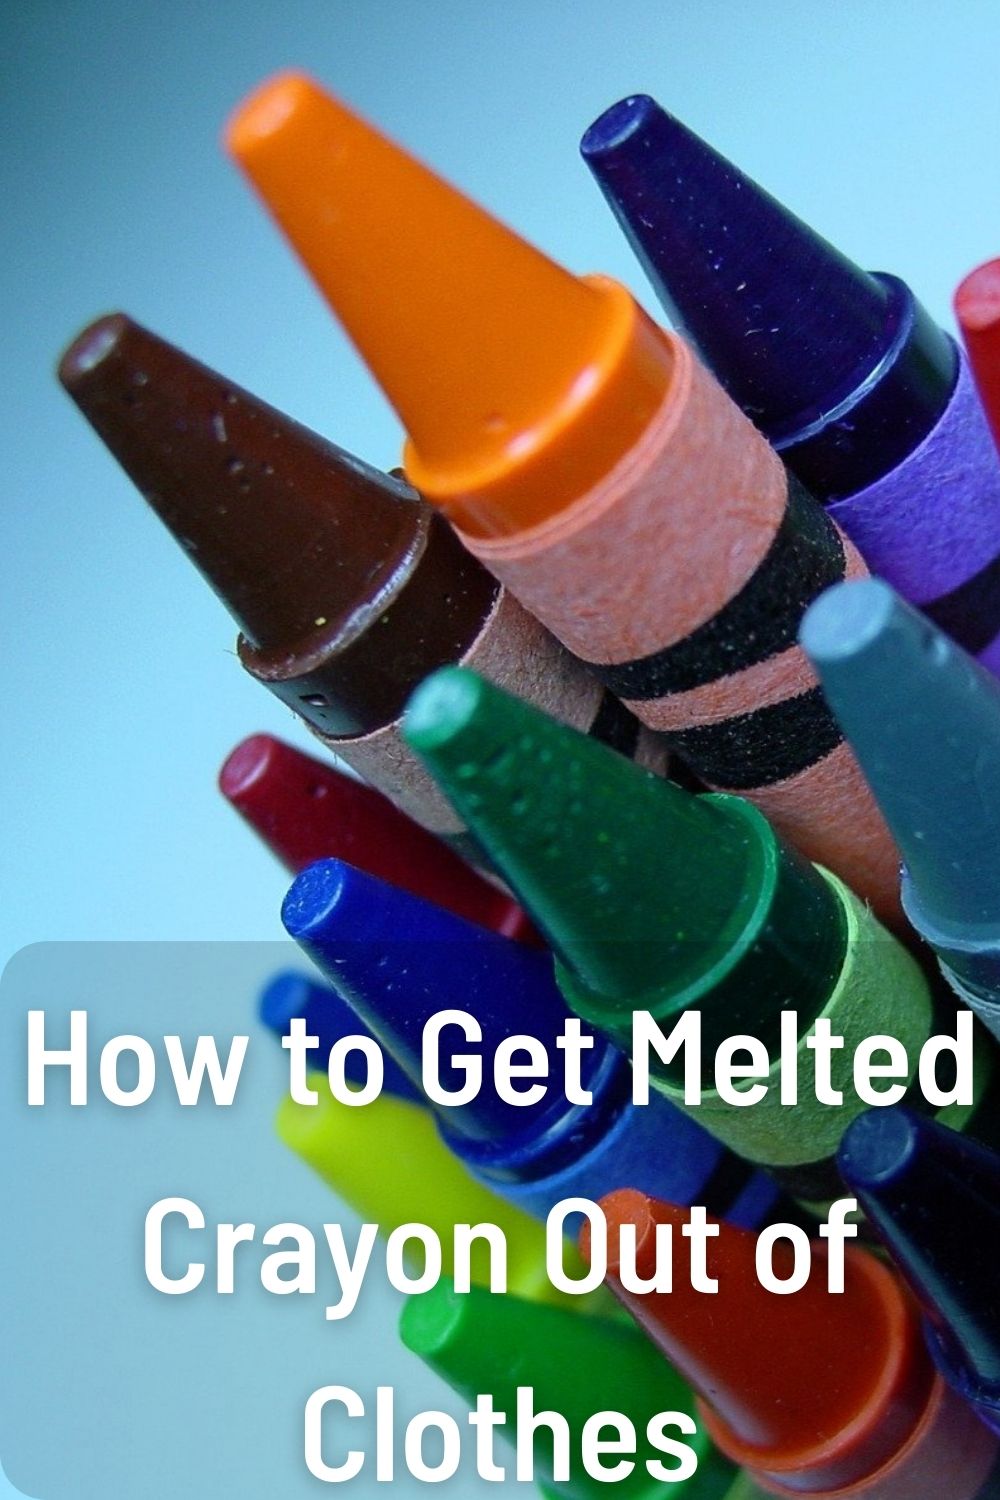 How to Get Melted Crayon Out of Clothes